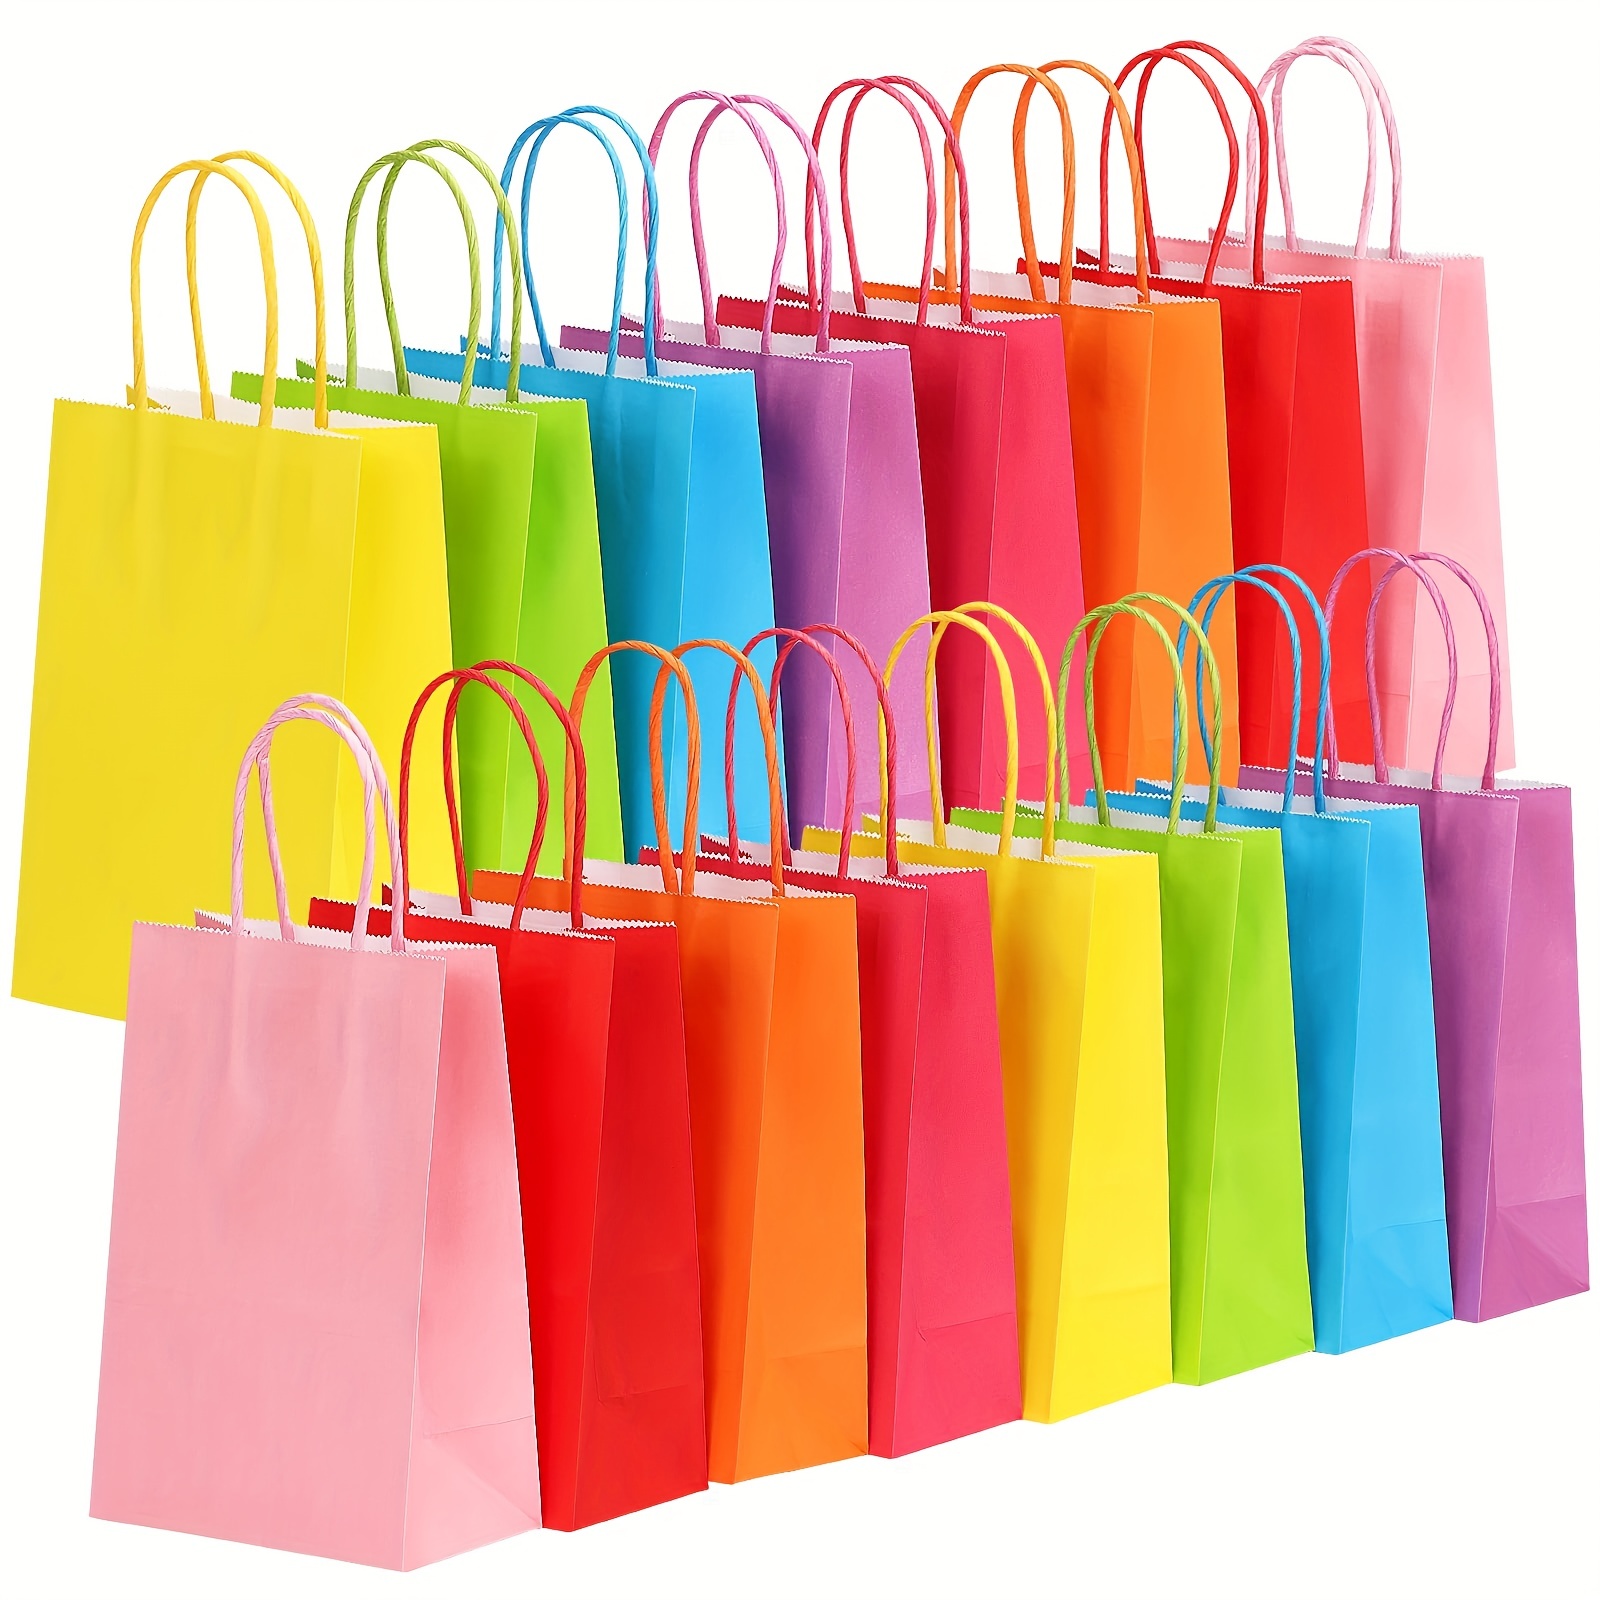 BLEWINDZ 32 Pieces Gift Bags with 32 Tissues,8 Colors Party Favor Bags with Handles, Rainbow Gift Bags for Wedding, Birthday, Party Supplies and Gifts